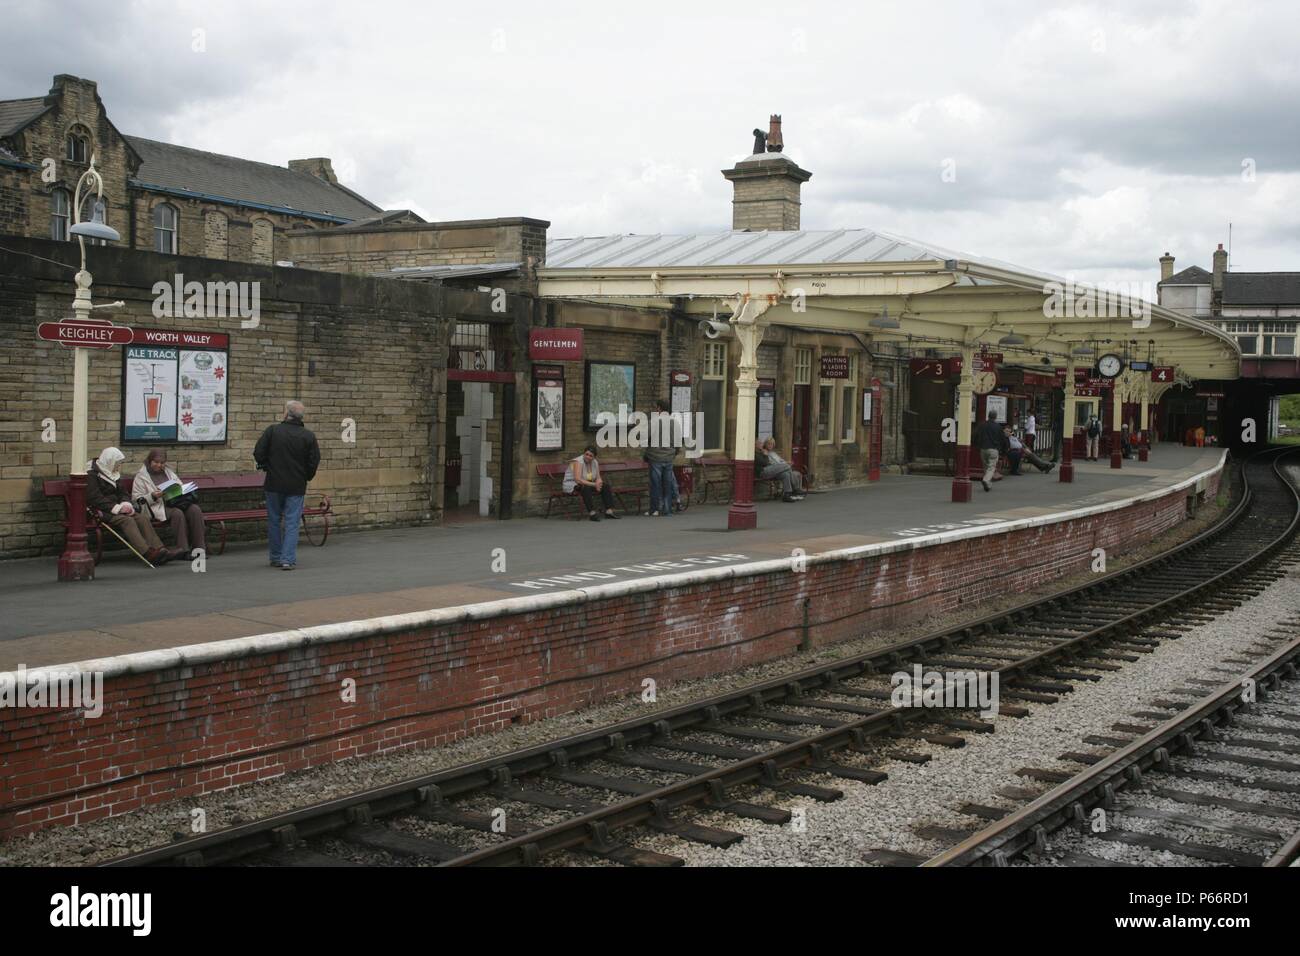 One of the Keighley and Worth Valley Railway platforms at Keighley station, Yorkshire. 2007 Stock Photo